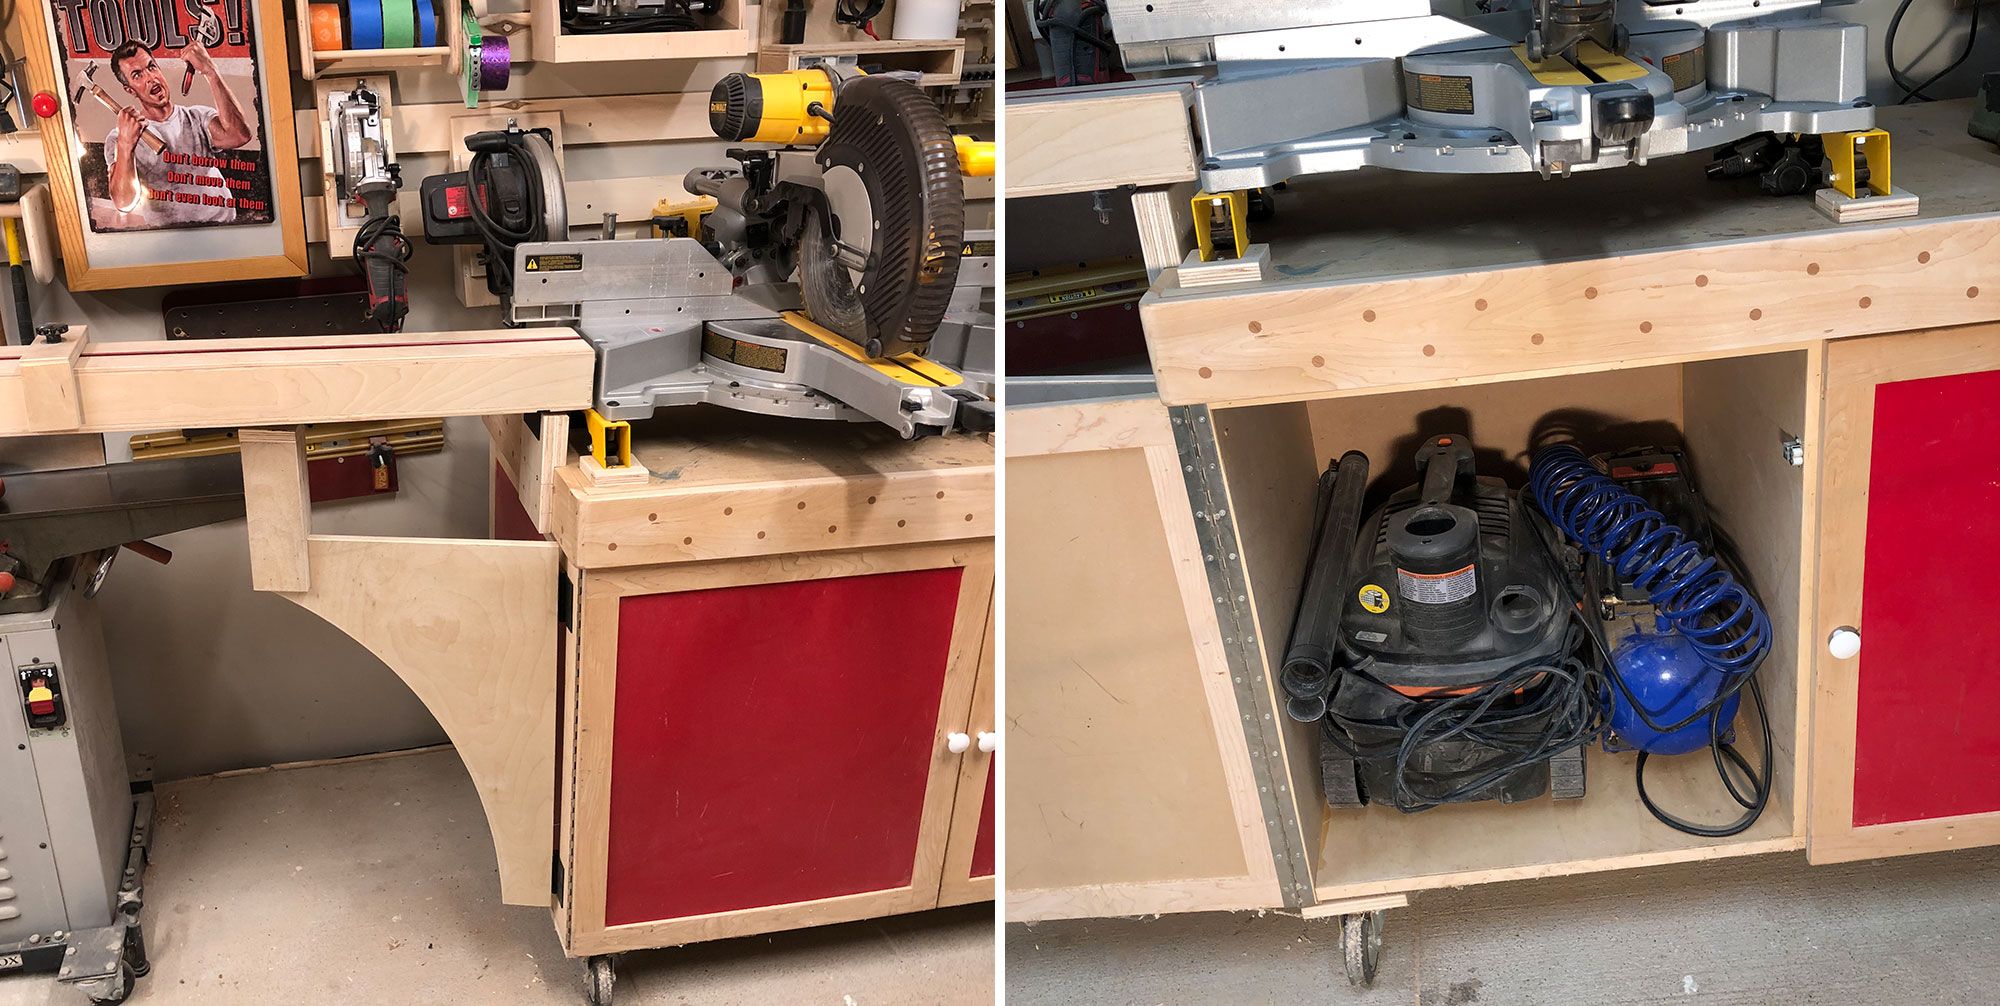 Image 1: Miter saw on bench with hinged extension arm. Image 2: Shop vacuum in cabinet under bench.